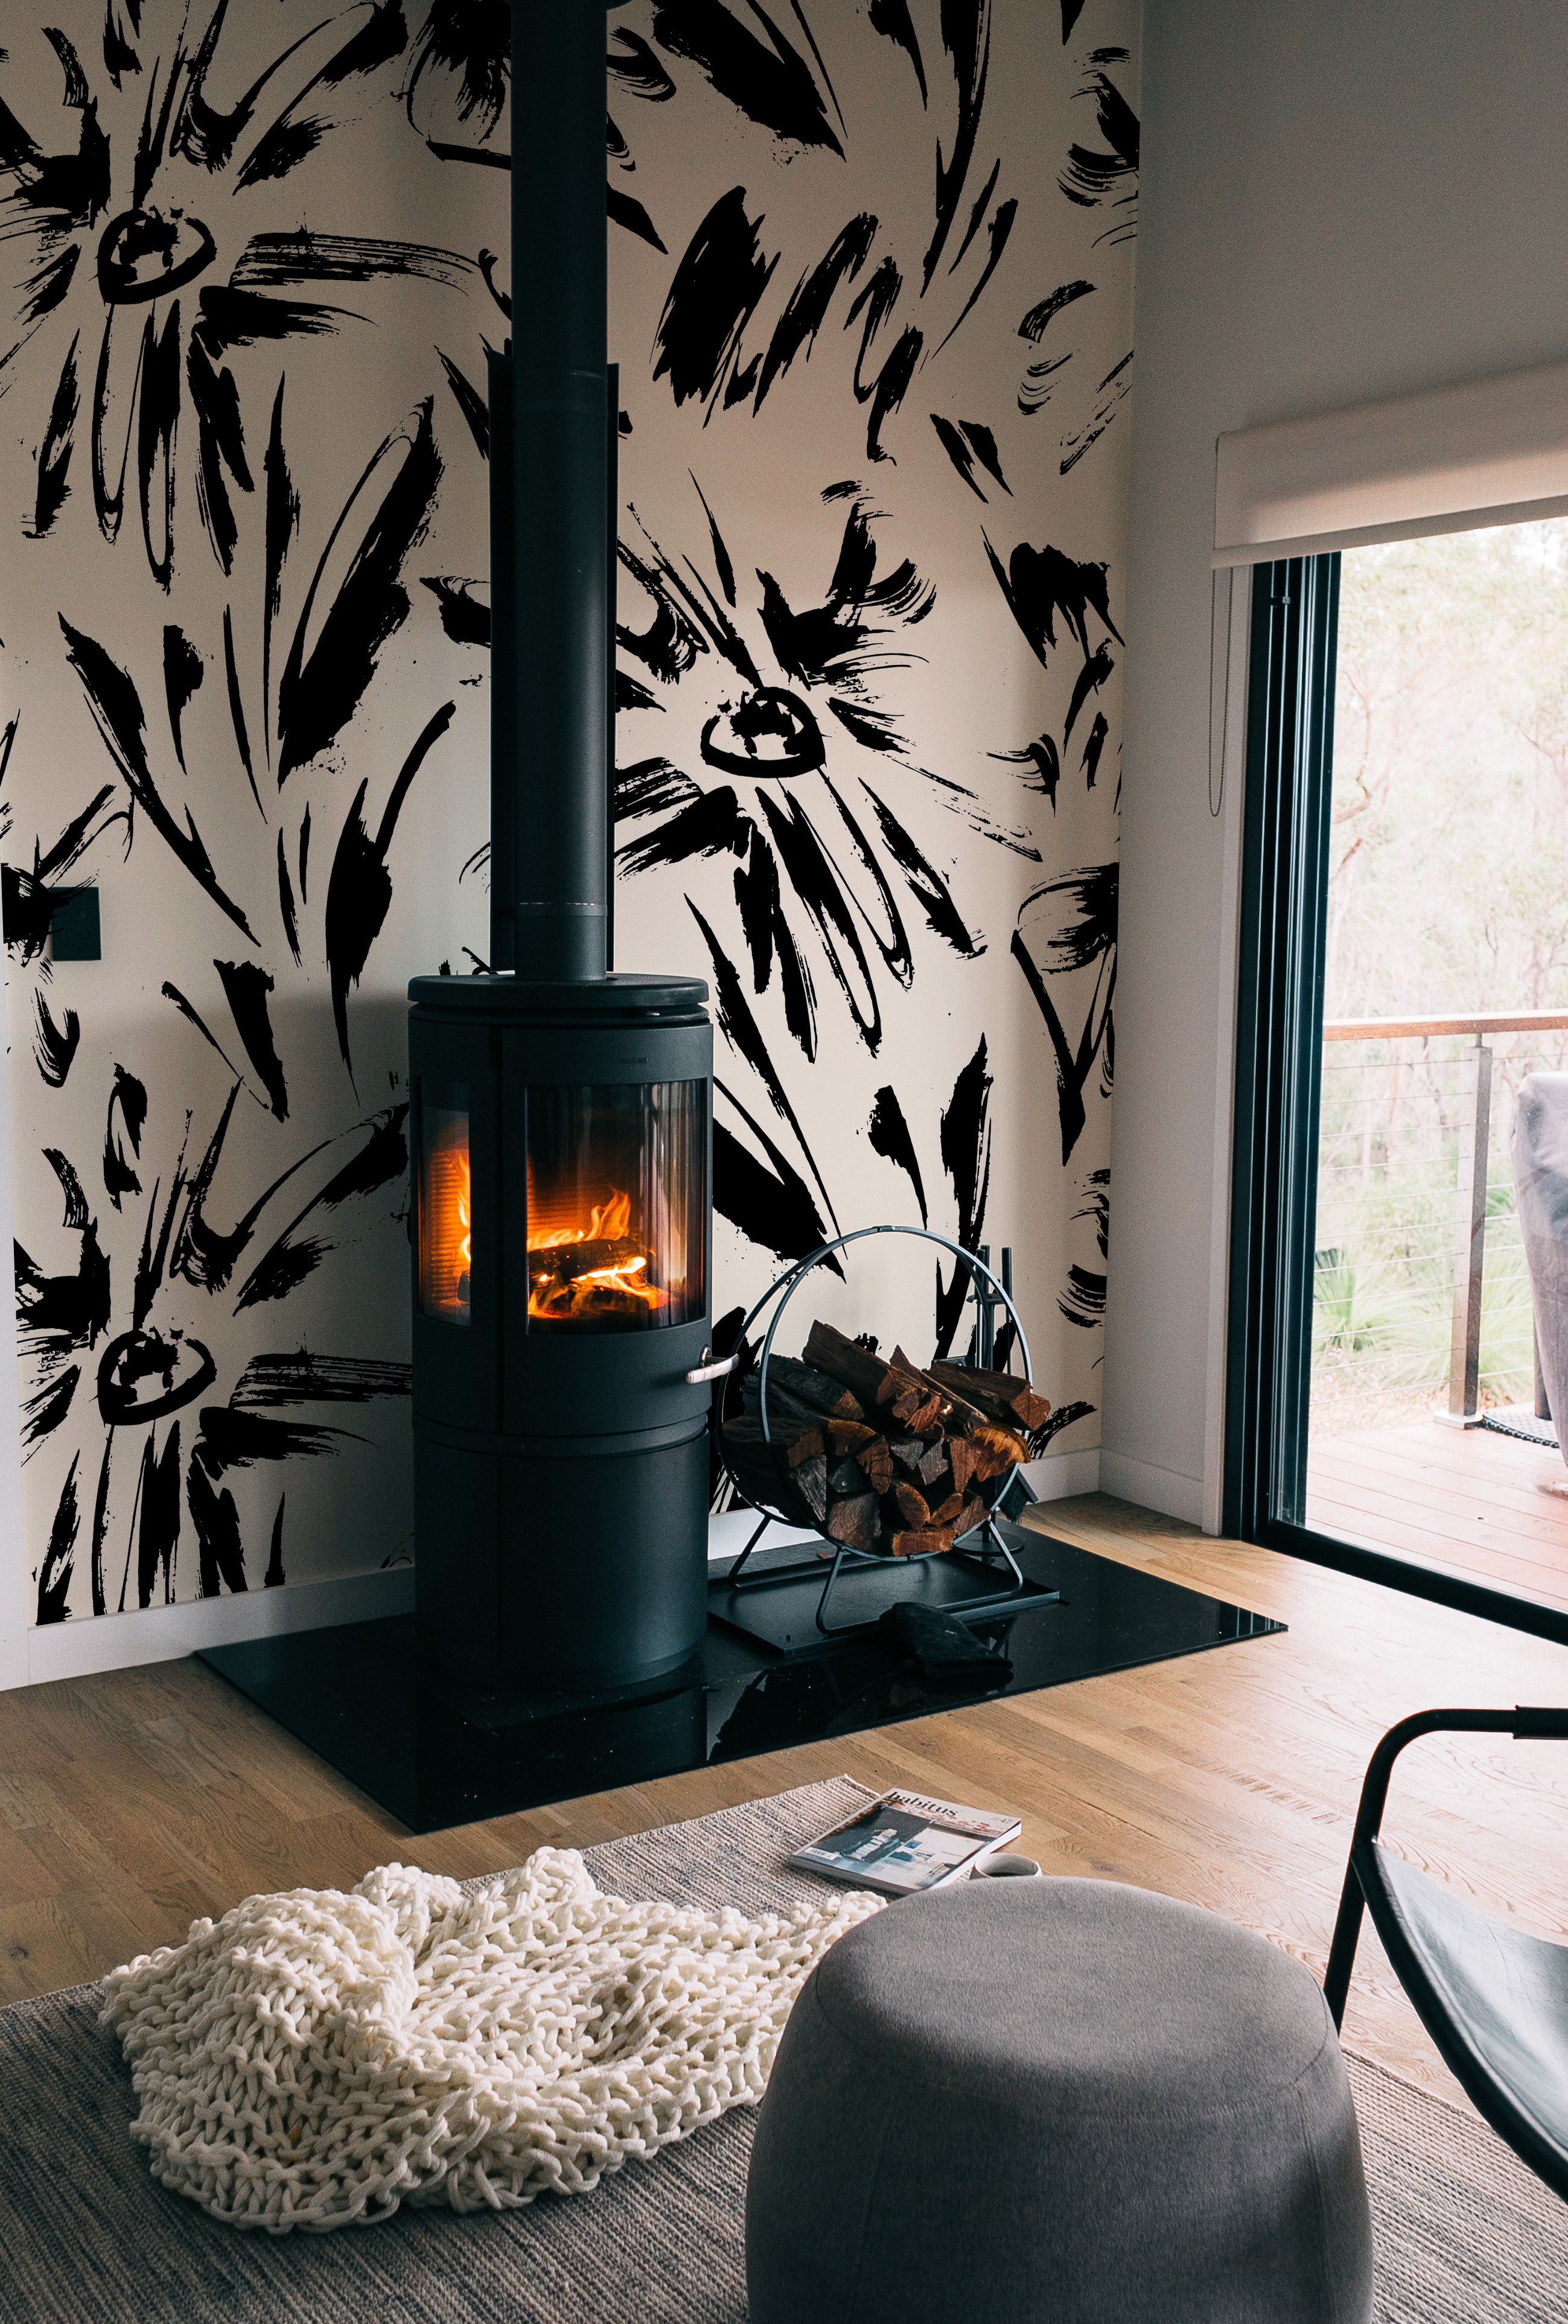 A cozy room setup showcasing the Modern Floral Sketch Wallpaper - 75" around a freestanding modern fireplace. The bold, black abstract floral patterns contrast strikingly with the white background, adding a dramatic flair to the warm and inviting space